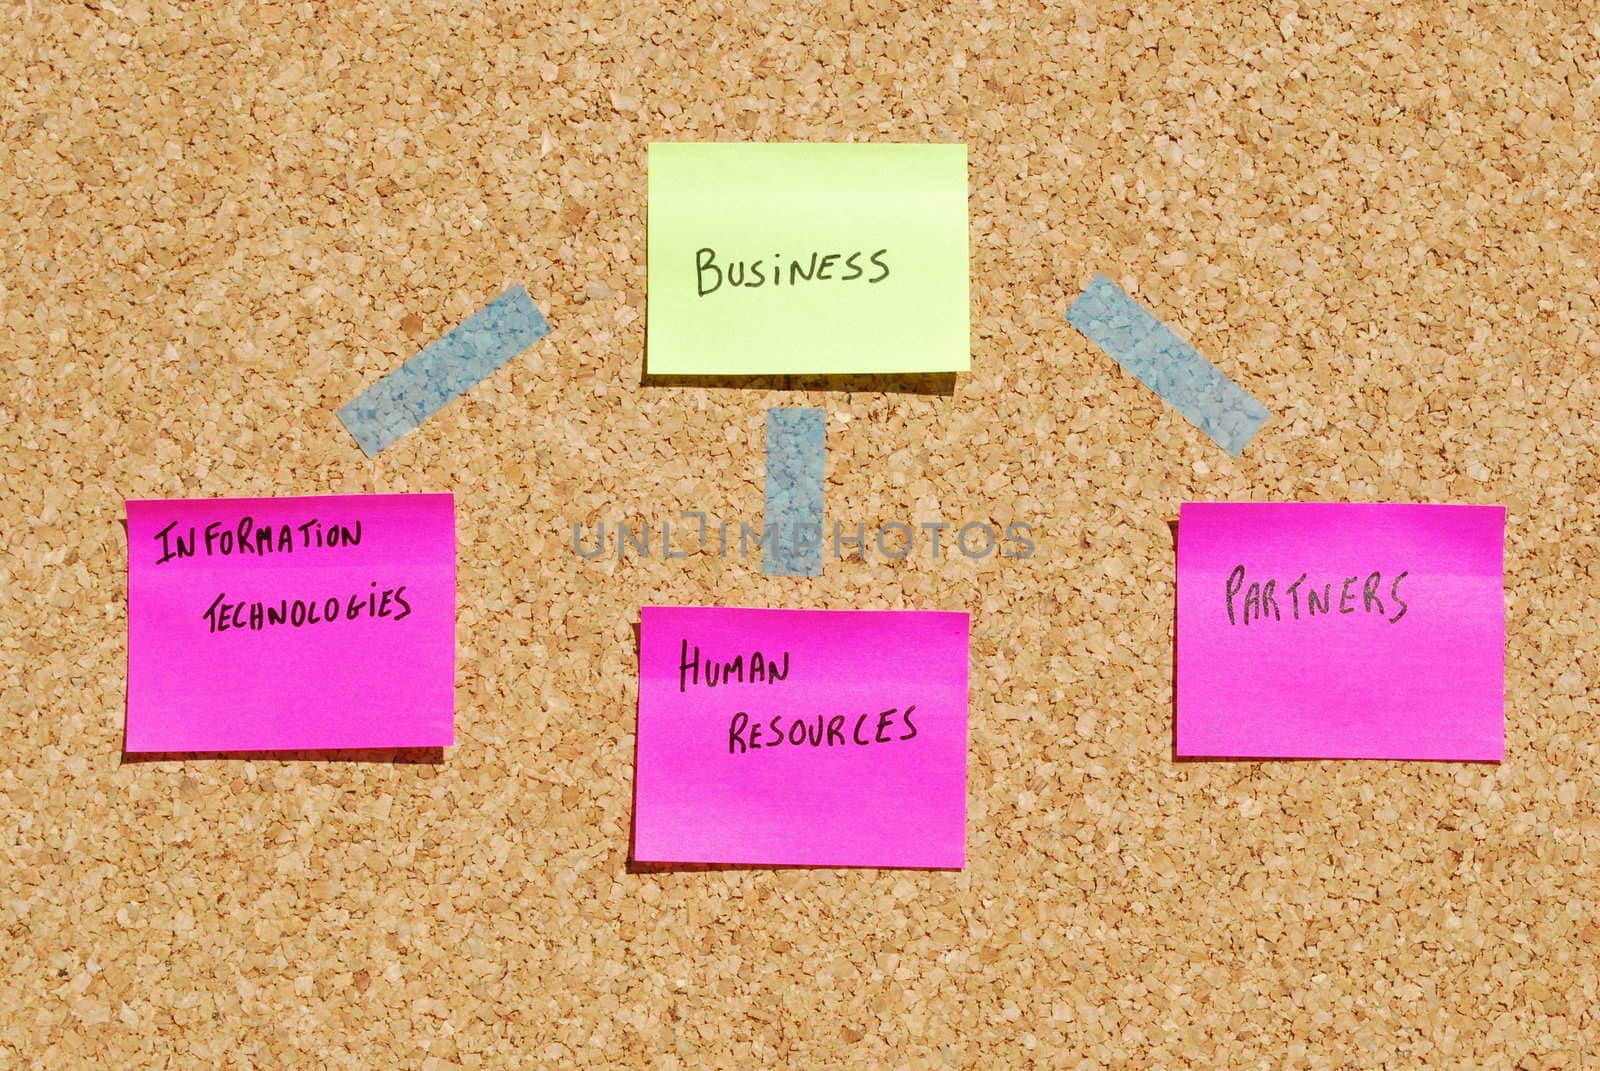 Business organization components by luissantos84